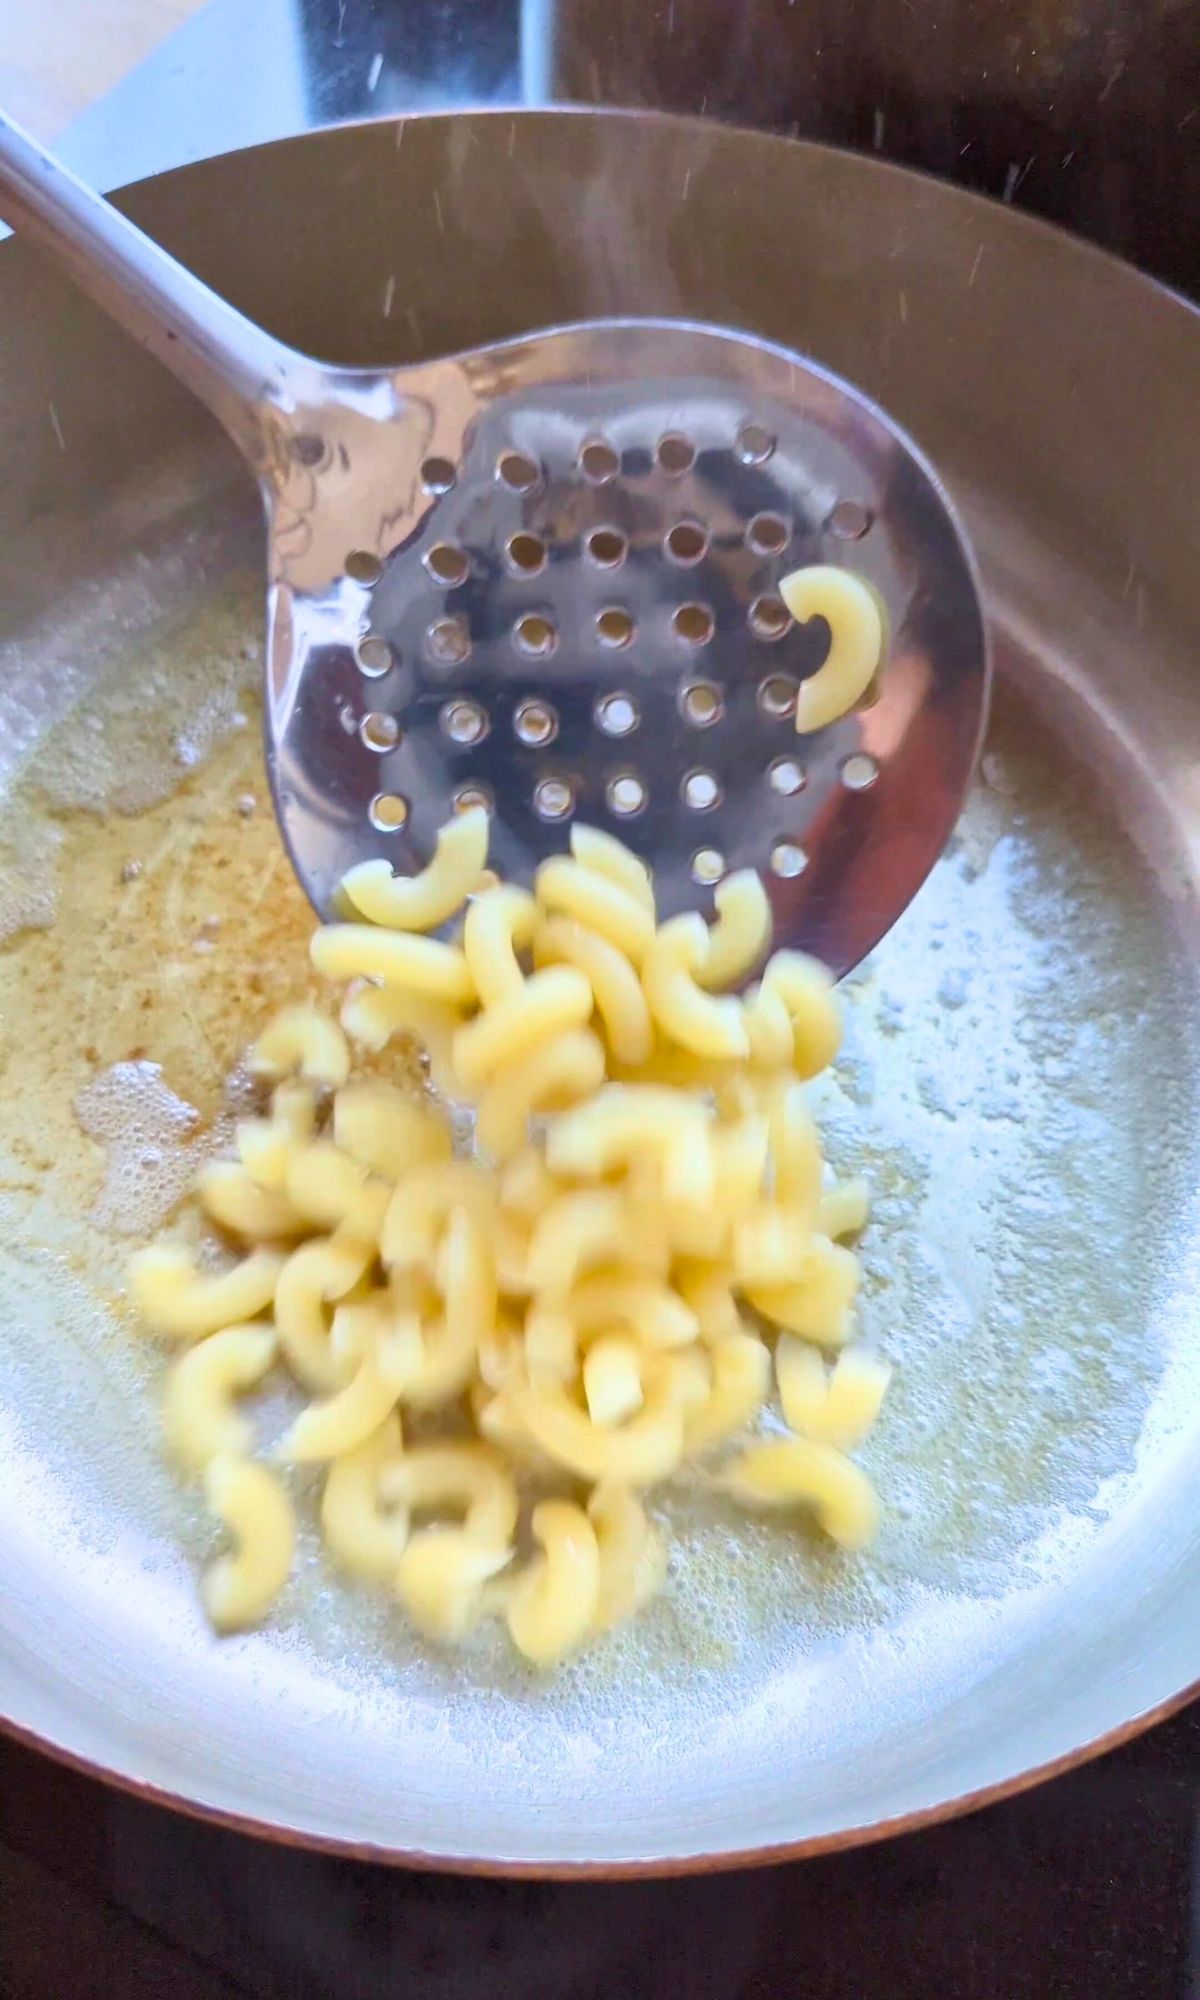 cooked macaroni noodles being added to melted butter in a pan.